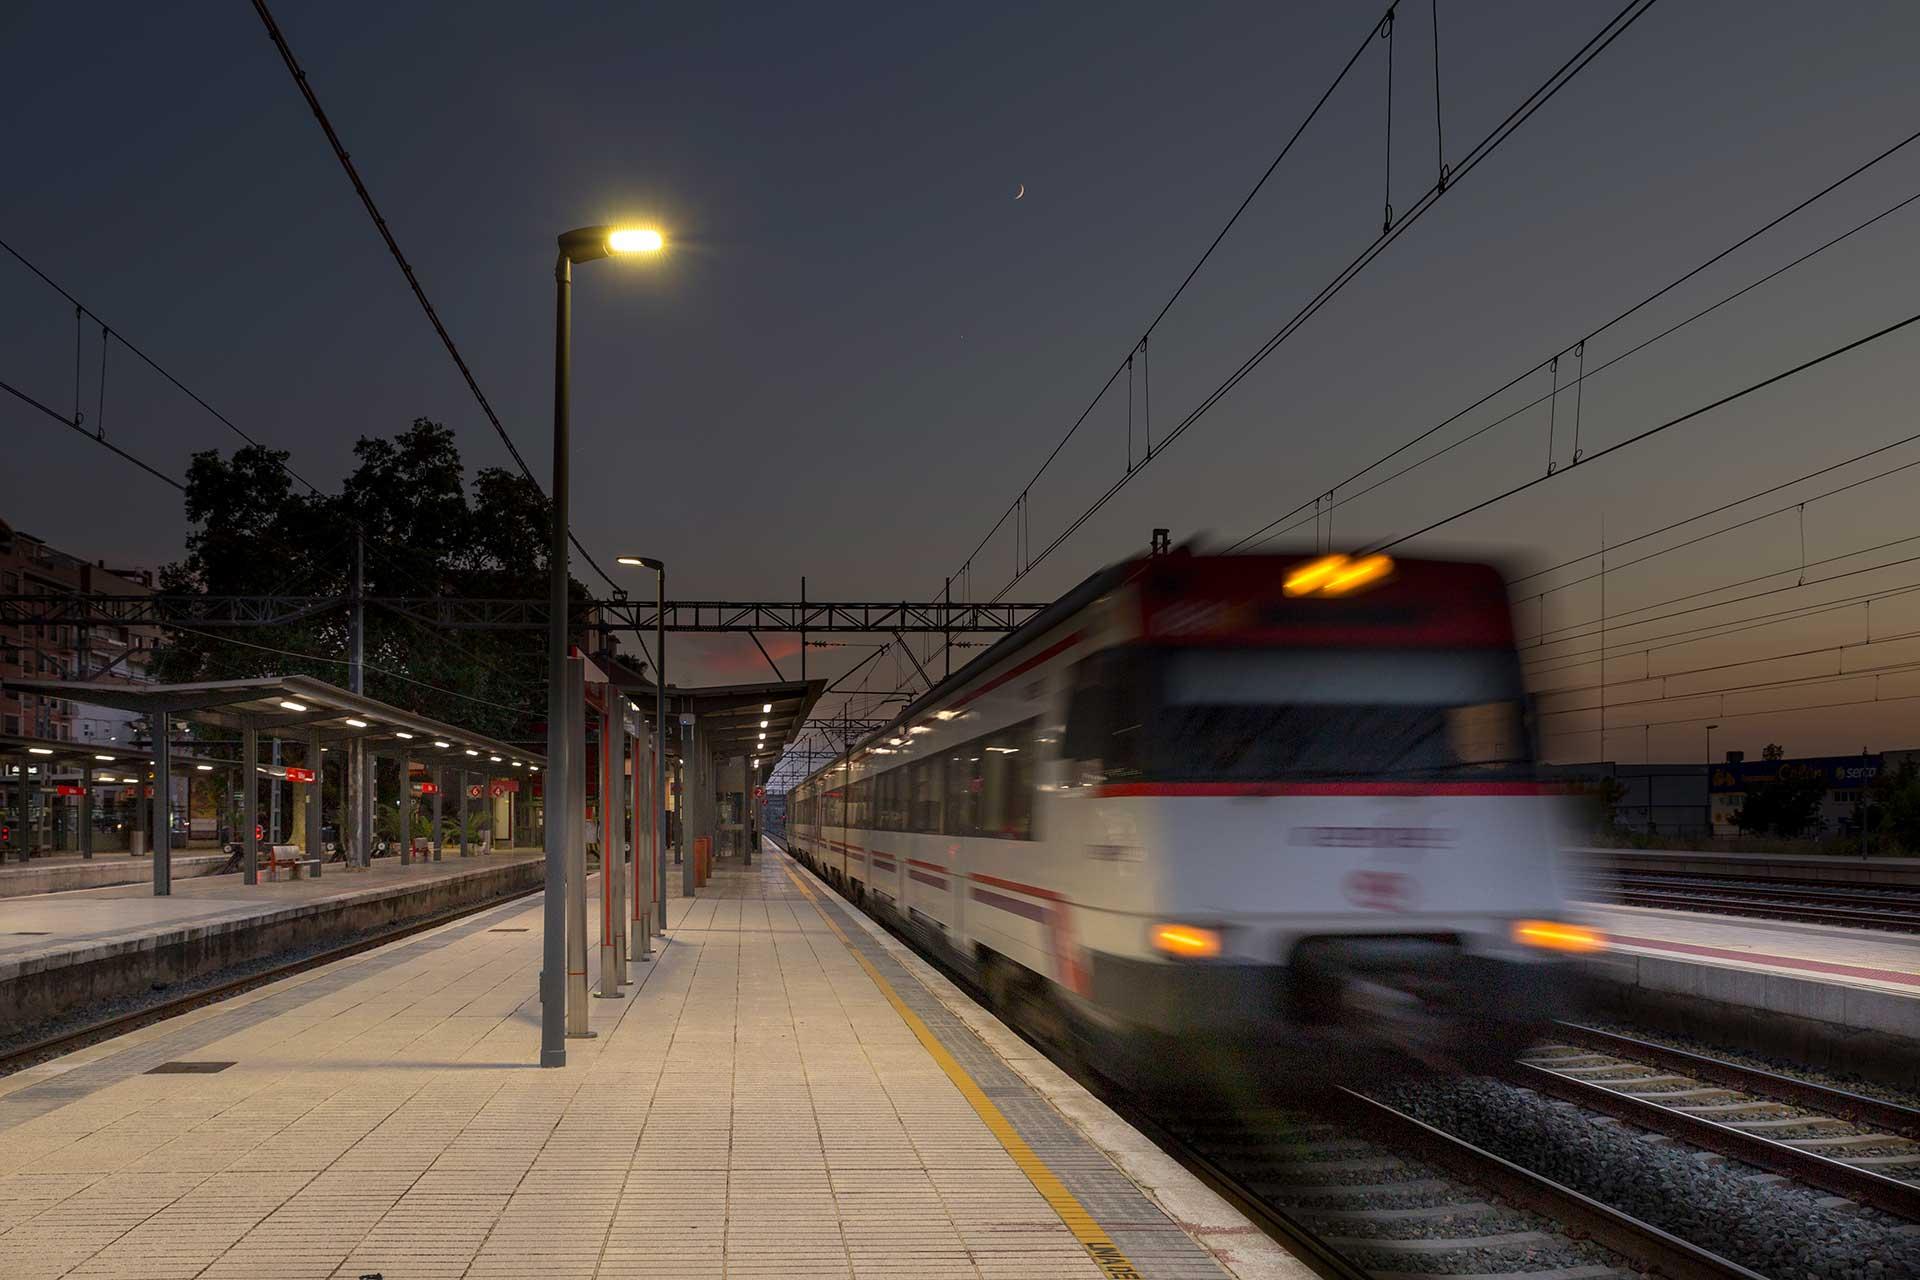 Teceo improves the customer experience while cutting costs for RENFE railway network